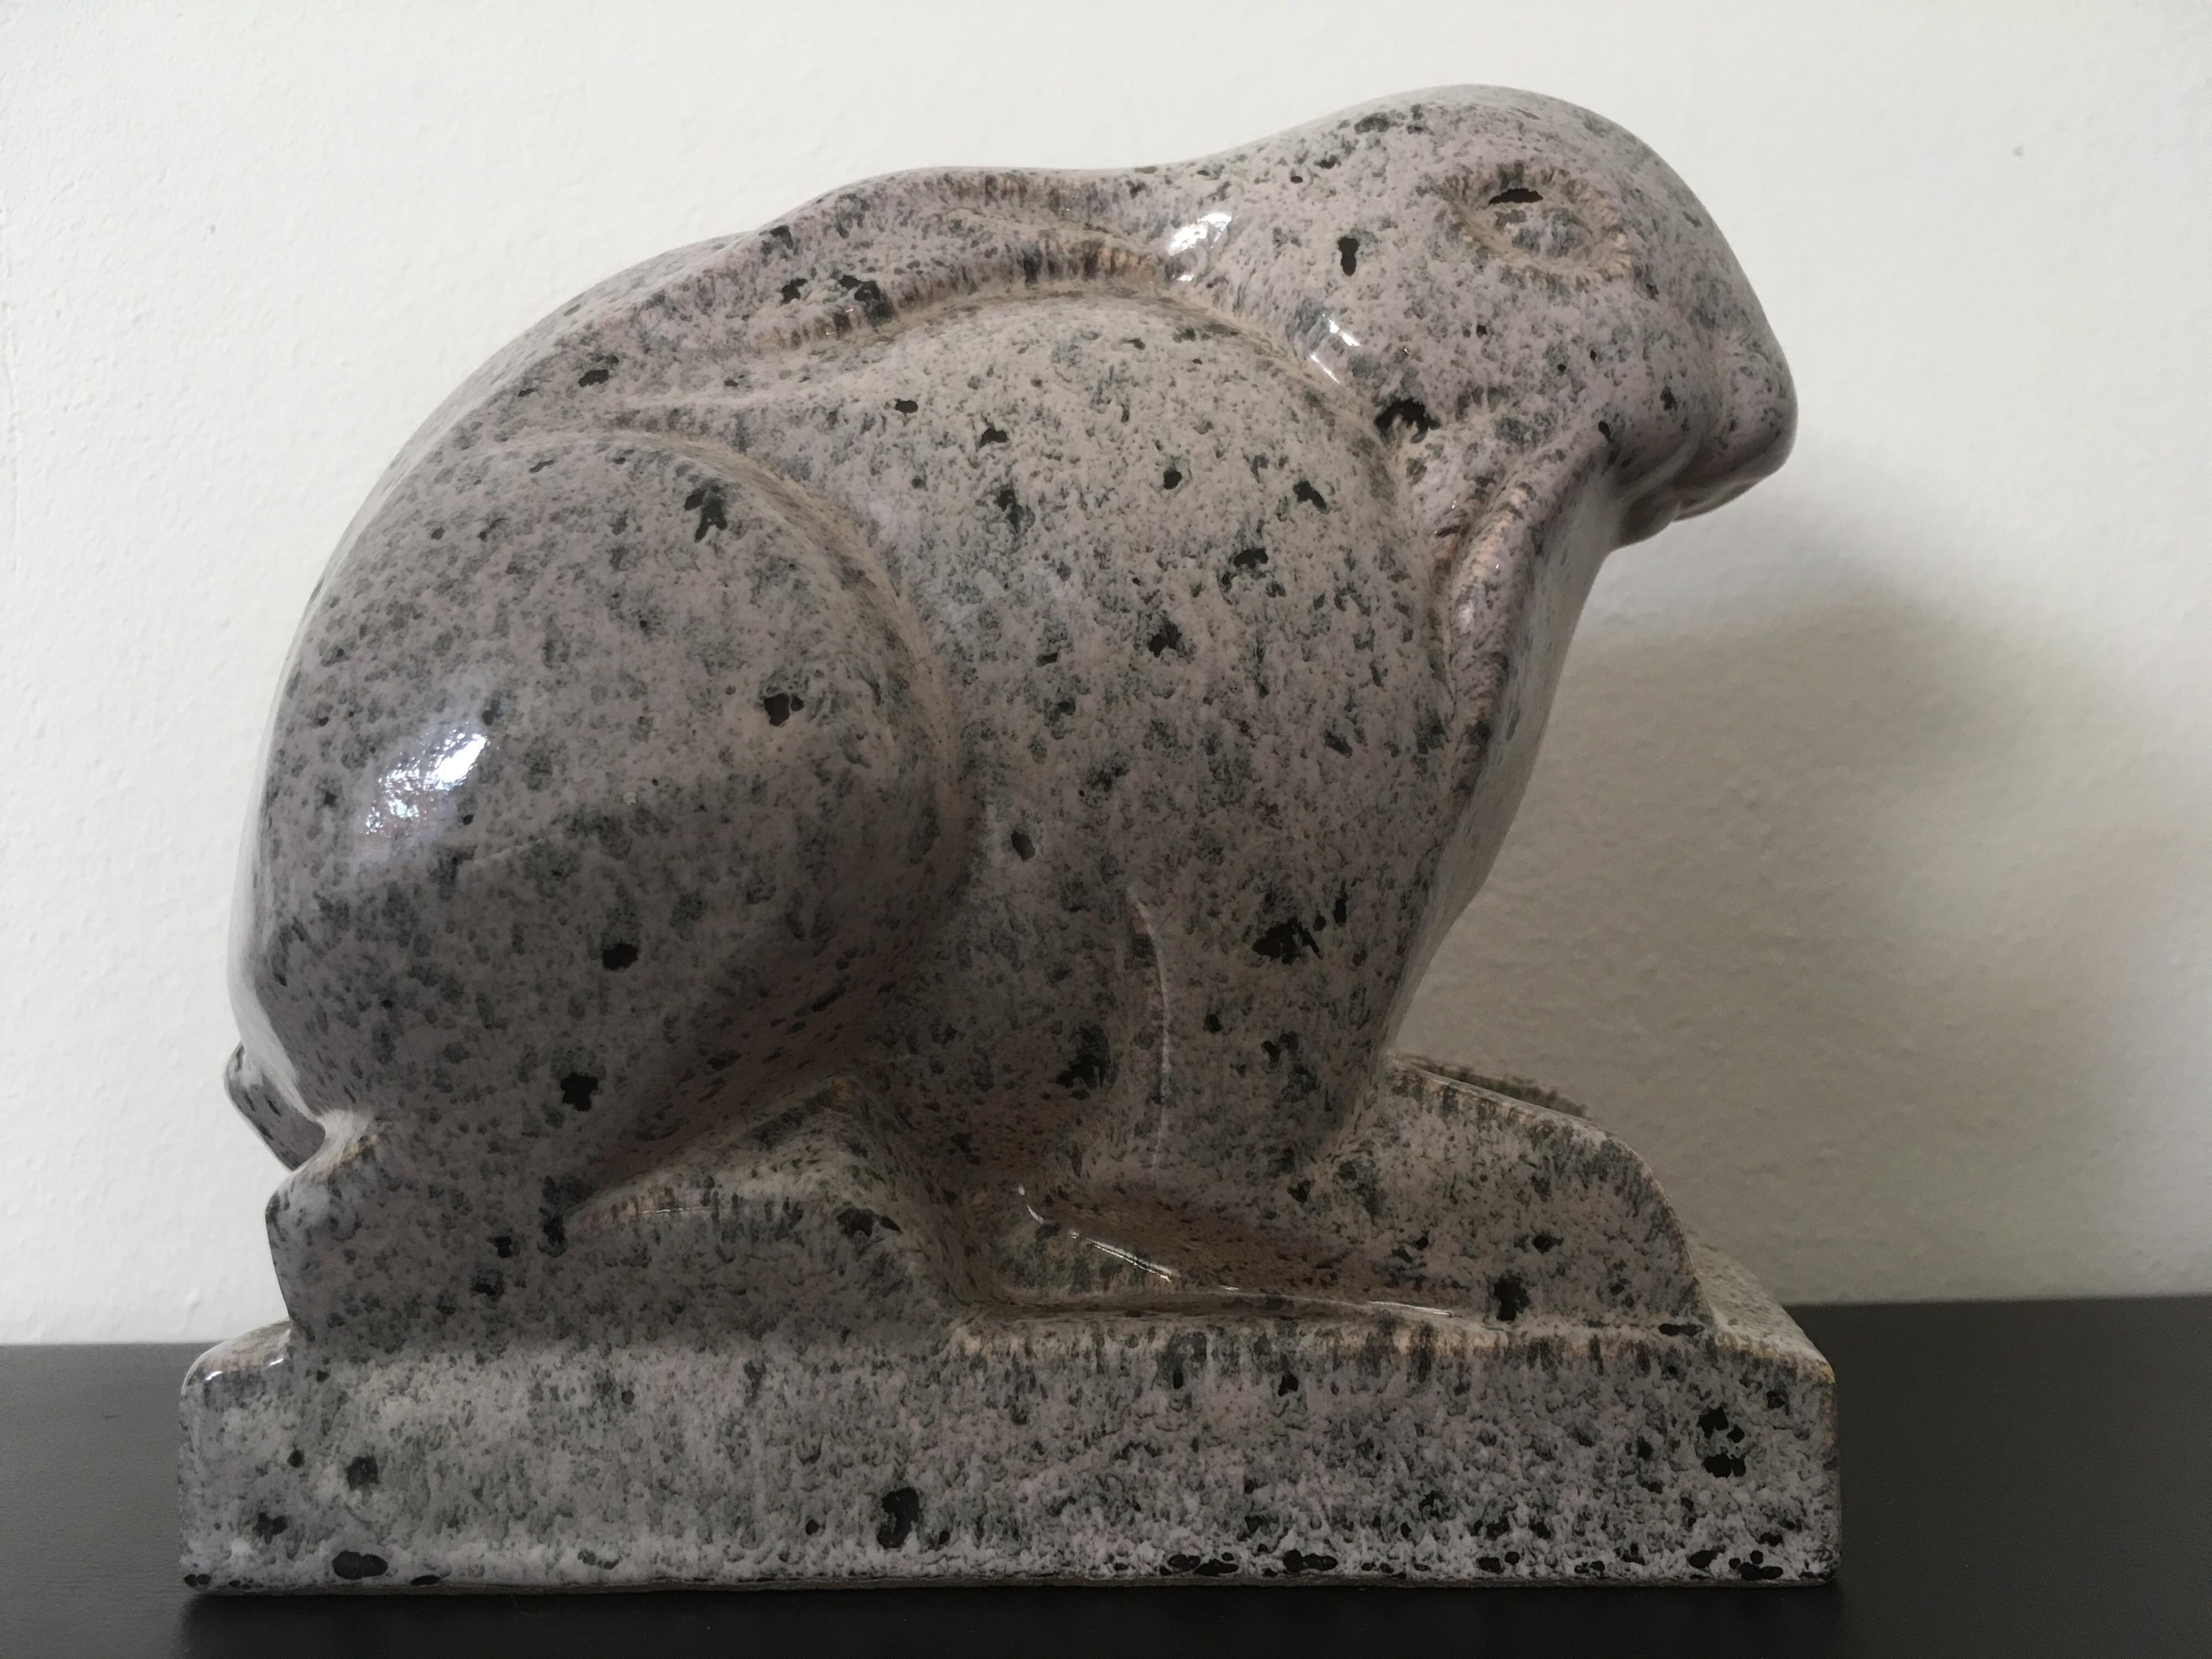 Grey ceramic rabbit designed by Jean et Joel Martel in France in 1923 and edited by Manufacture de Boulogne circa 1930s.
Underside signed: JJ martel, made in France, marque de la manufacture de Boulogne
The Martel brothers (1896-1966) are great